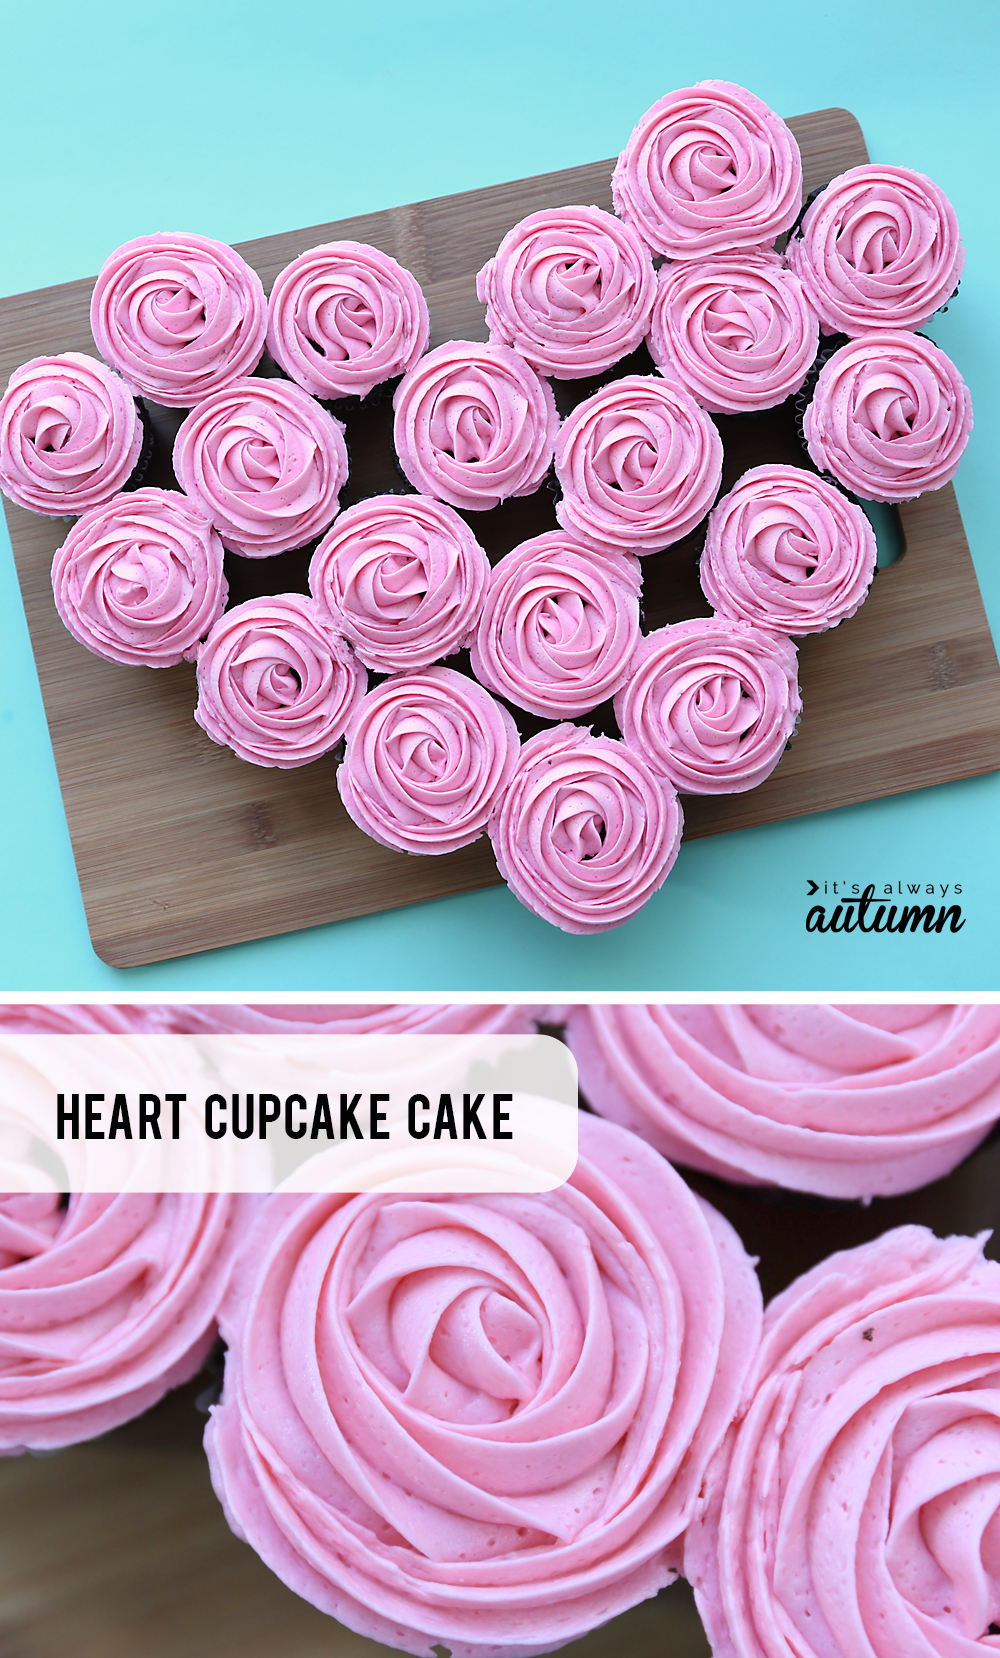 How to Make a Heart-Shaped Cake - Fabulessly Frugal